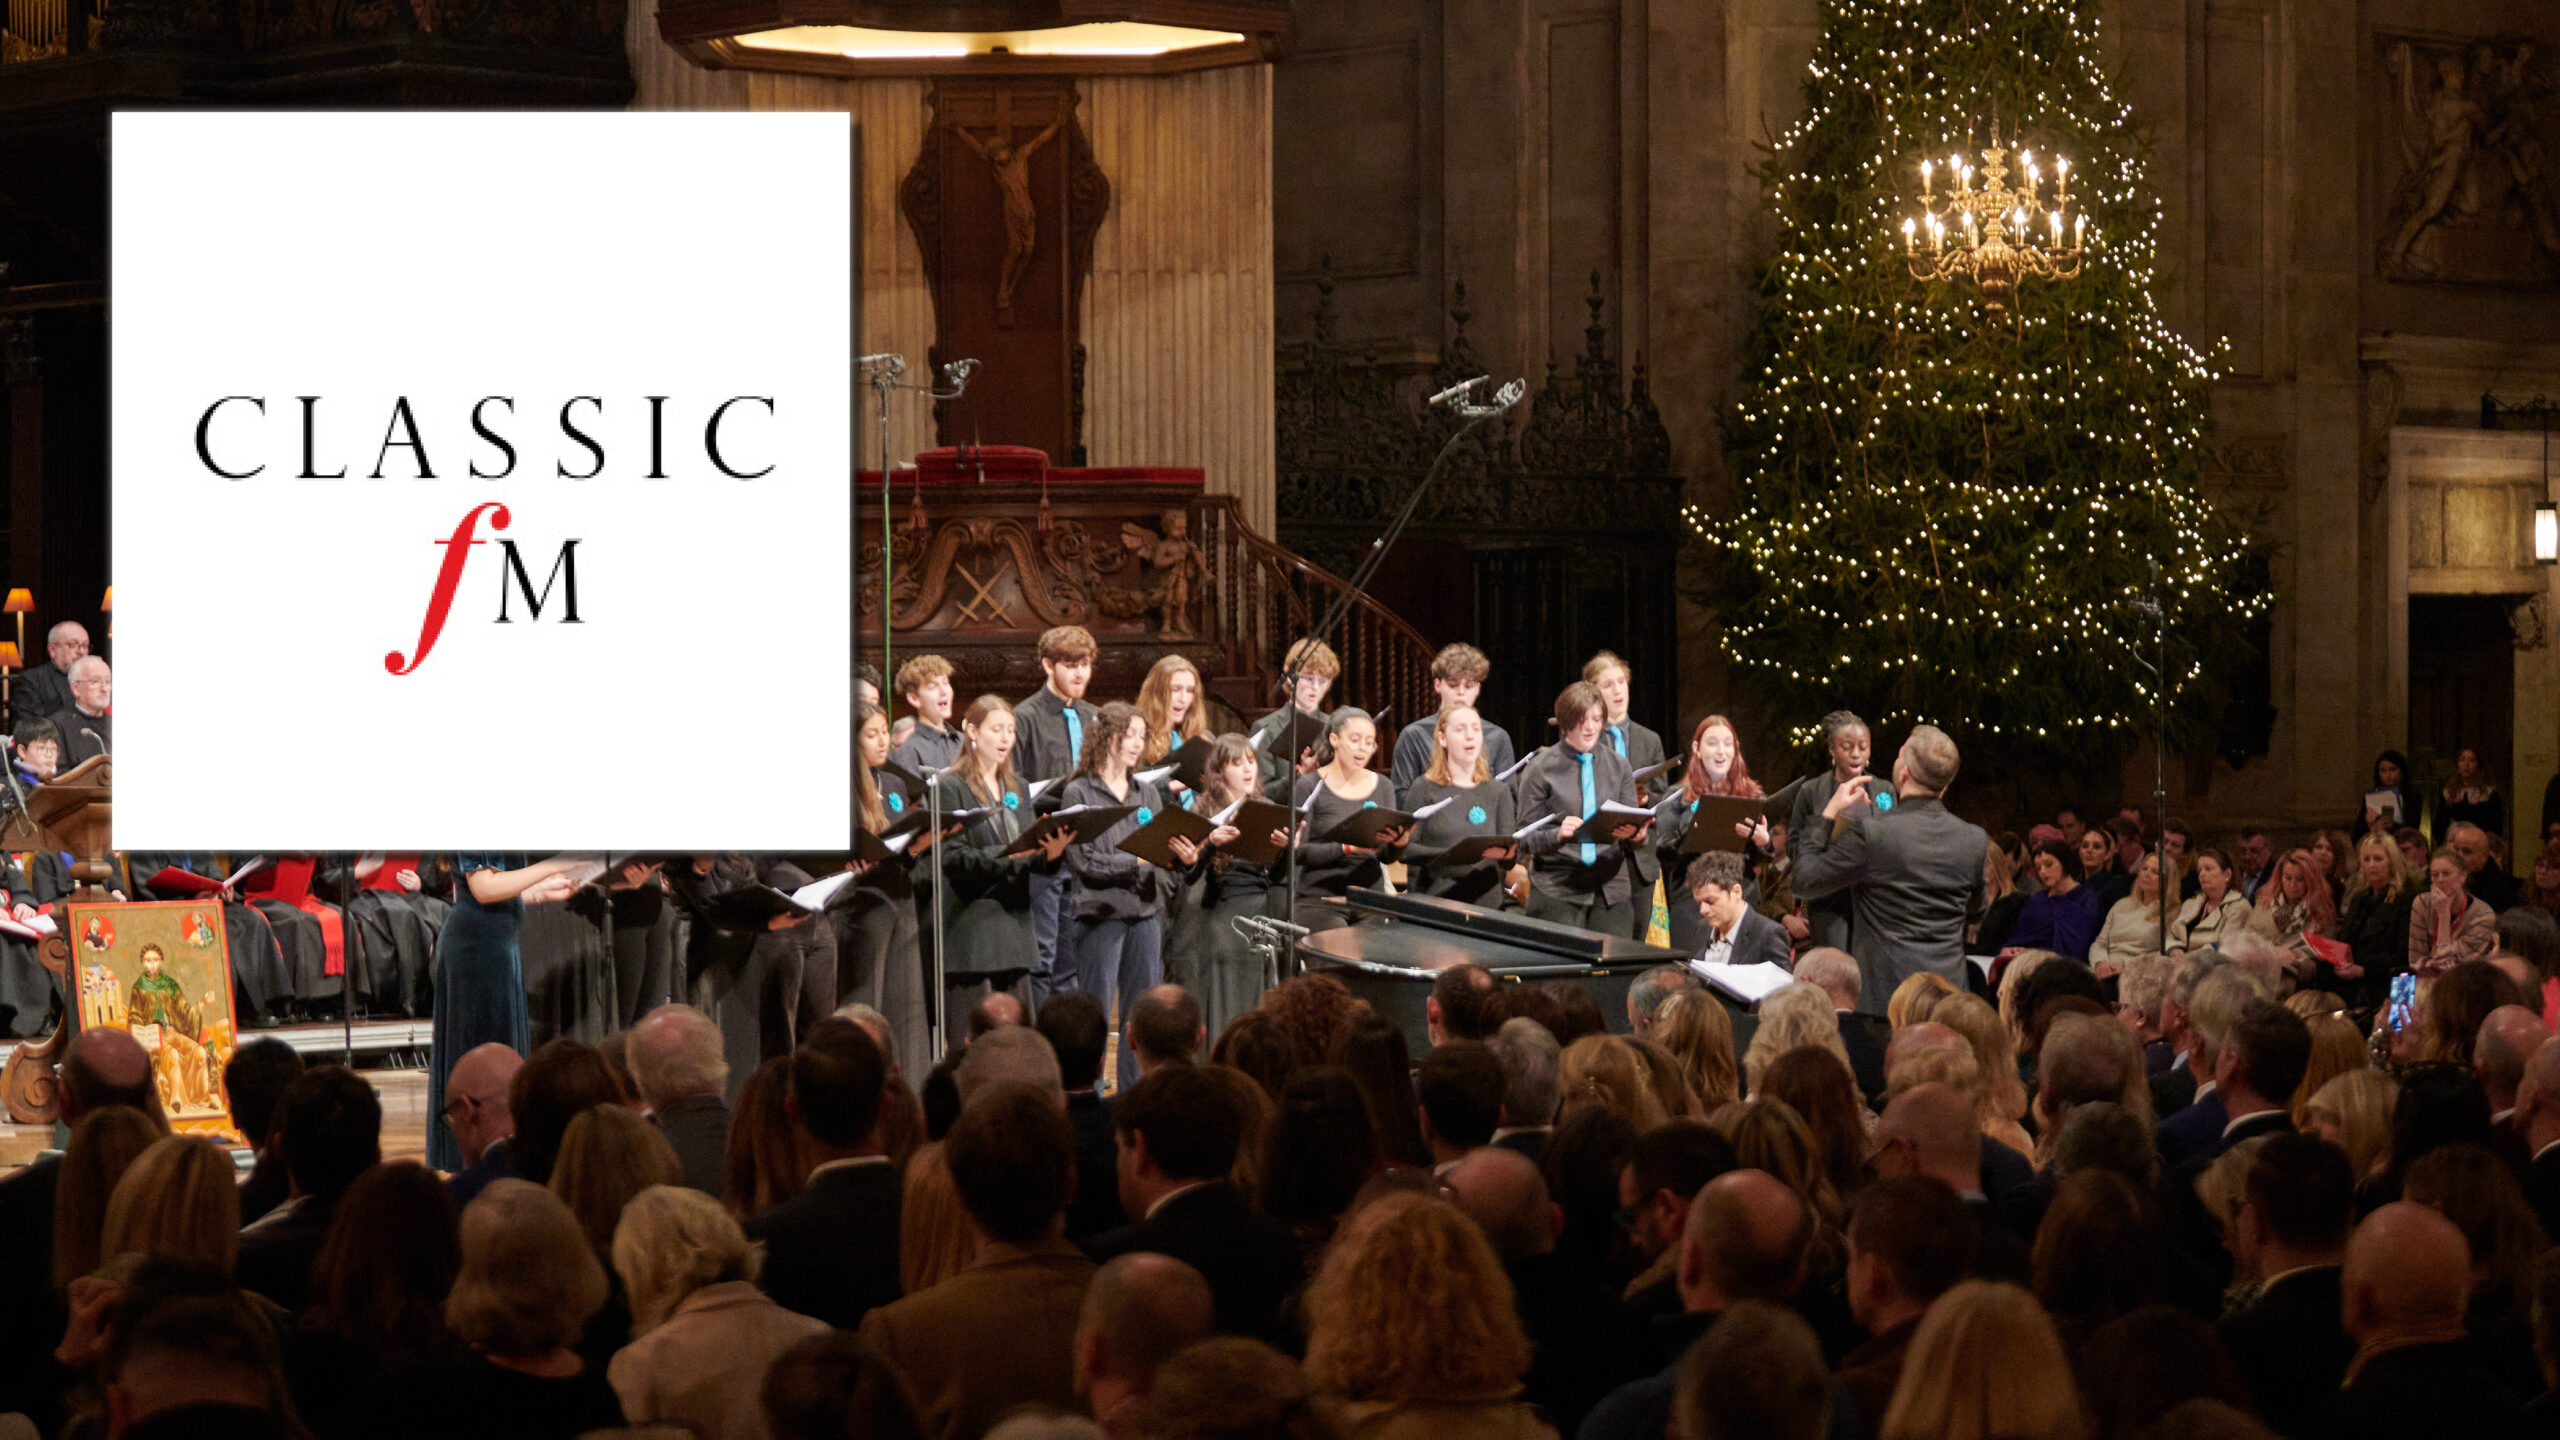 A white classic fm logo in the top left. Behind it, LYC Chamber Choir is singing, dressed in black with teal accessories, in a cathedral. There is a large Christmas tree behind the choir to the right. In the foreground, a congregation is watching.